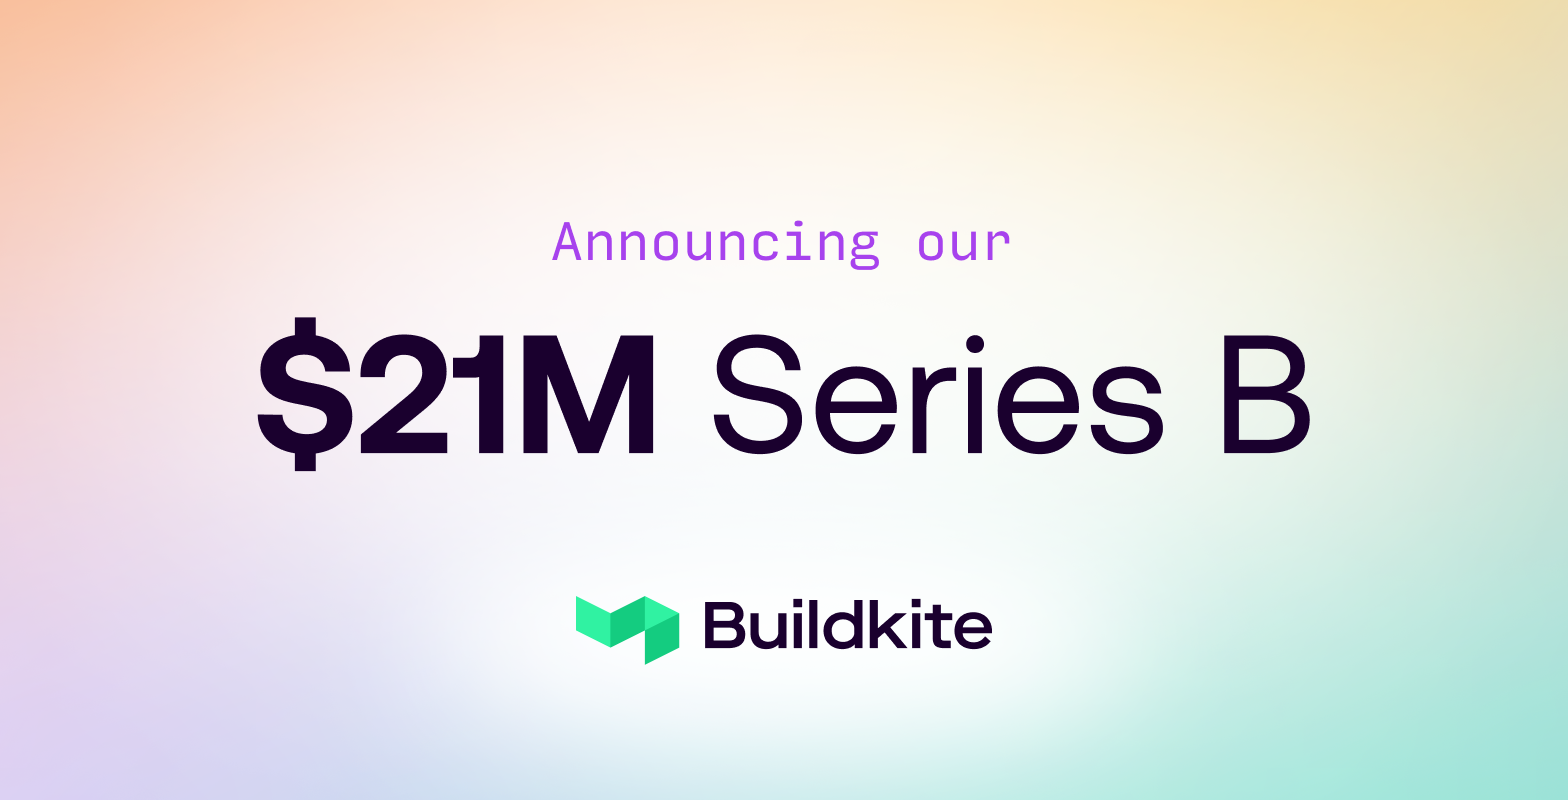 "Announcing our $21M Series B"